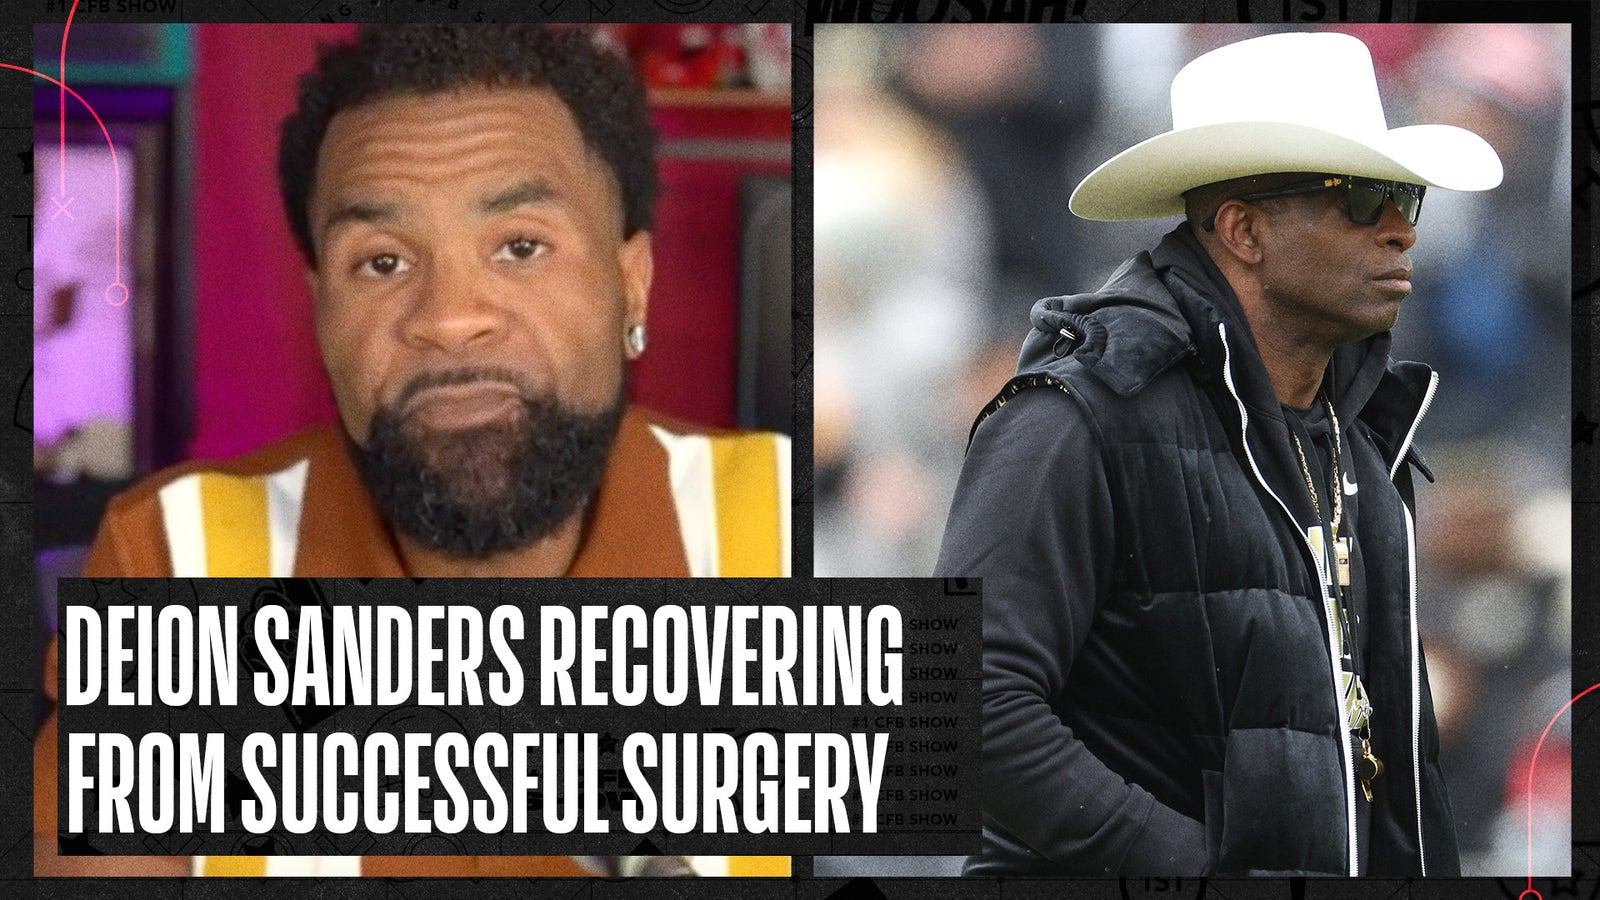 Deion Sanders recovering from successful surgery